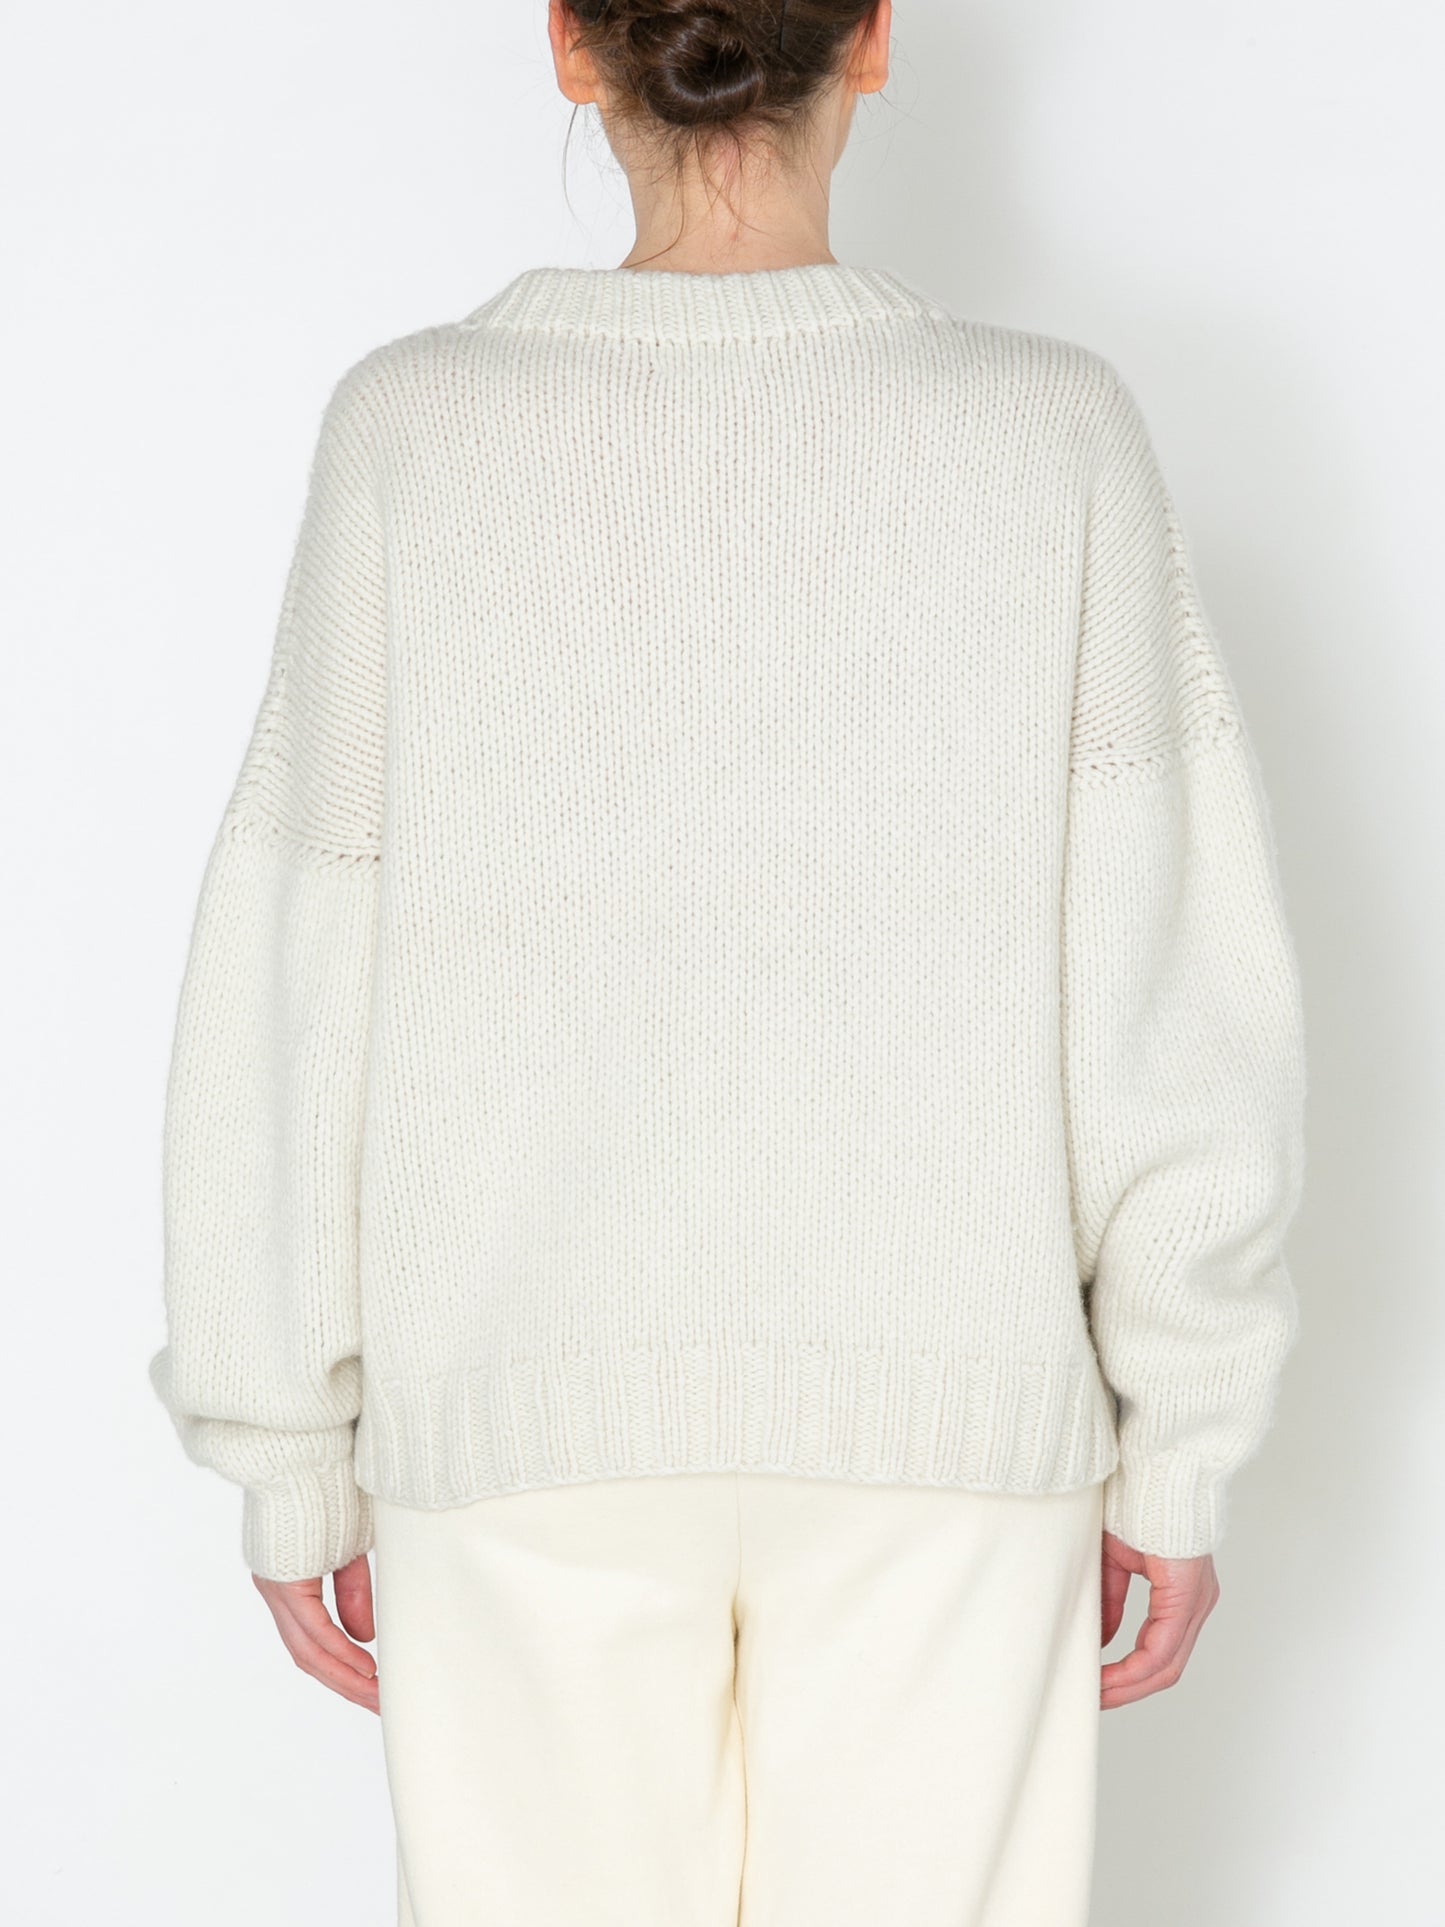 NOMADS SWEATER  HAND MADE WOOL KNIT AM-K0112 O.White